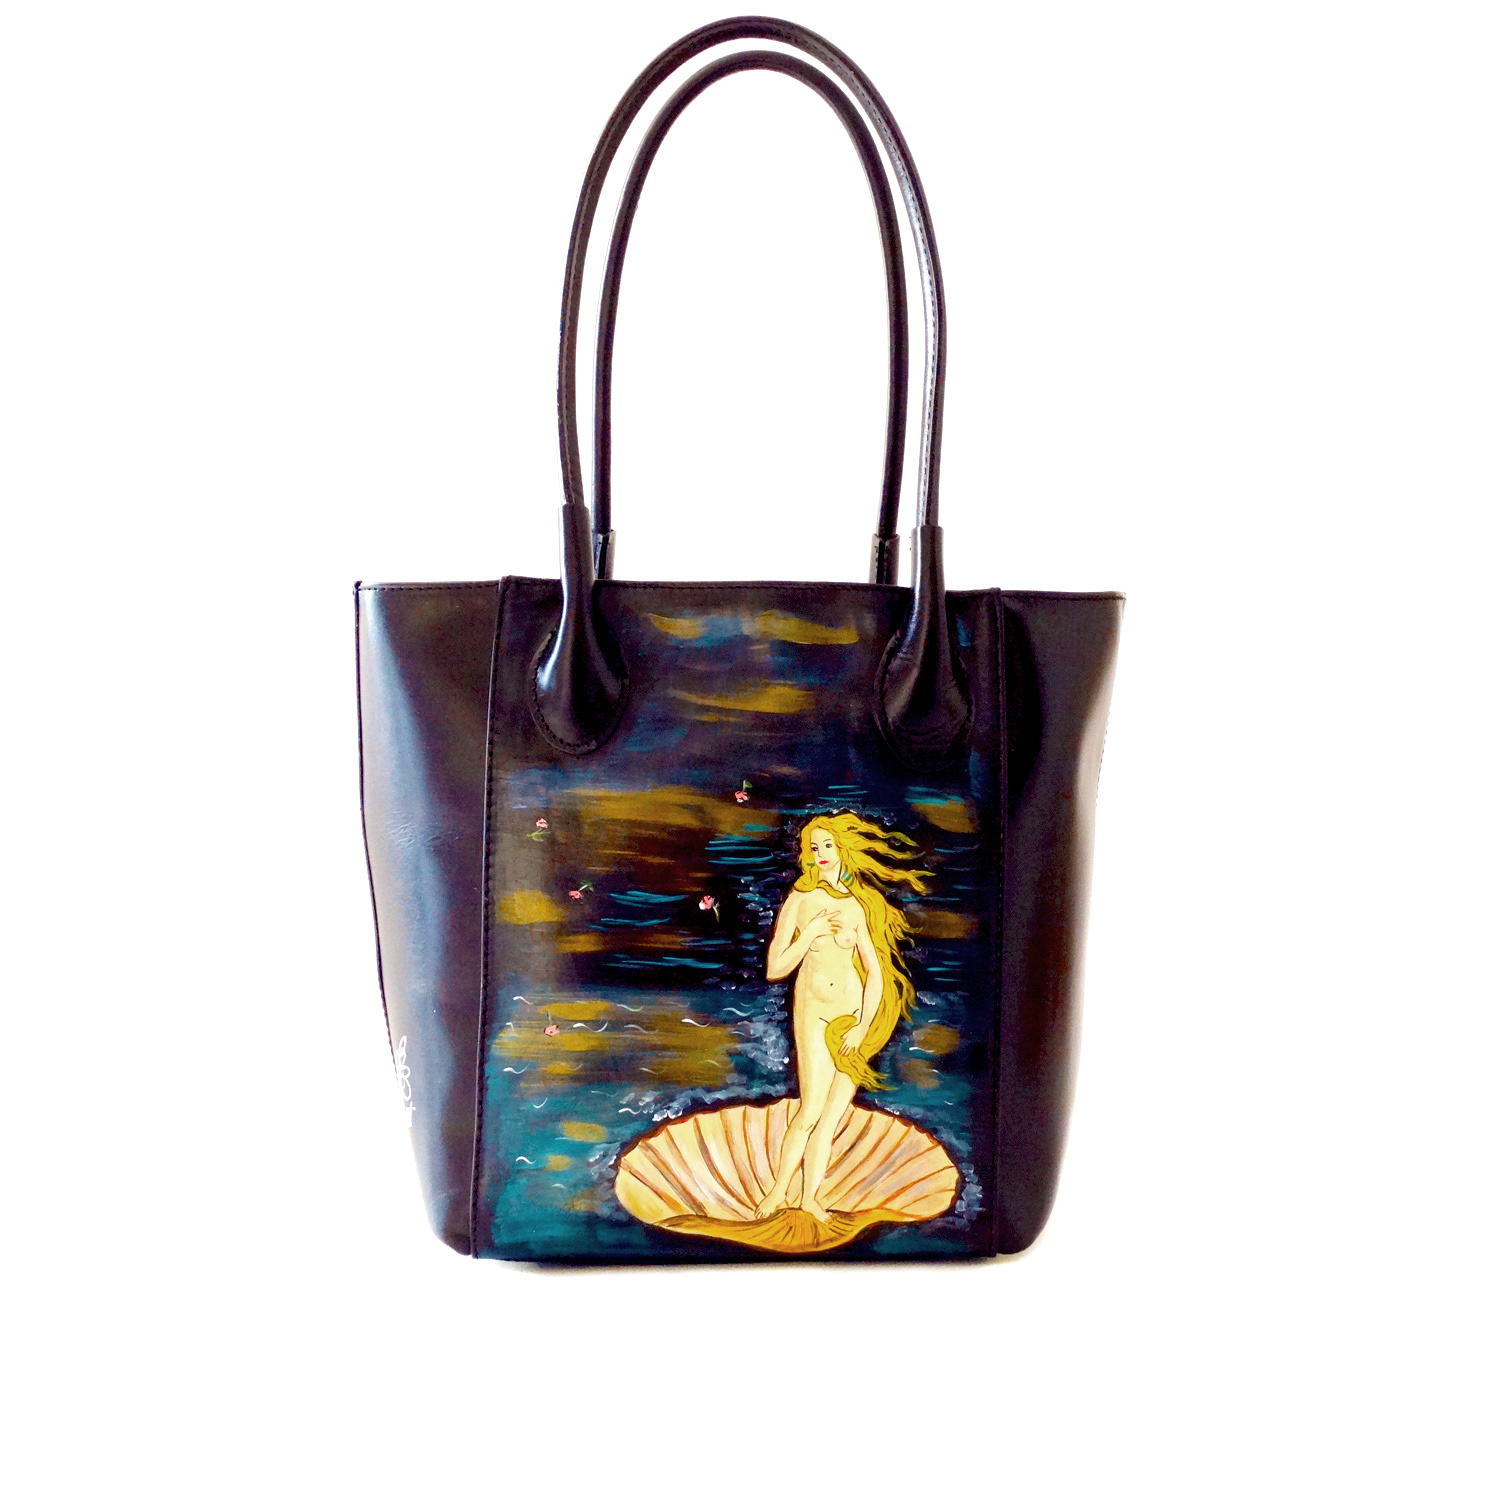 Hand-painted bag - The Birth of Venus by Botticelli